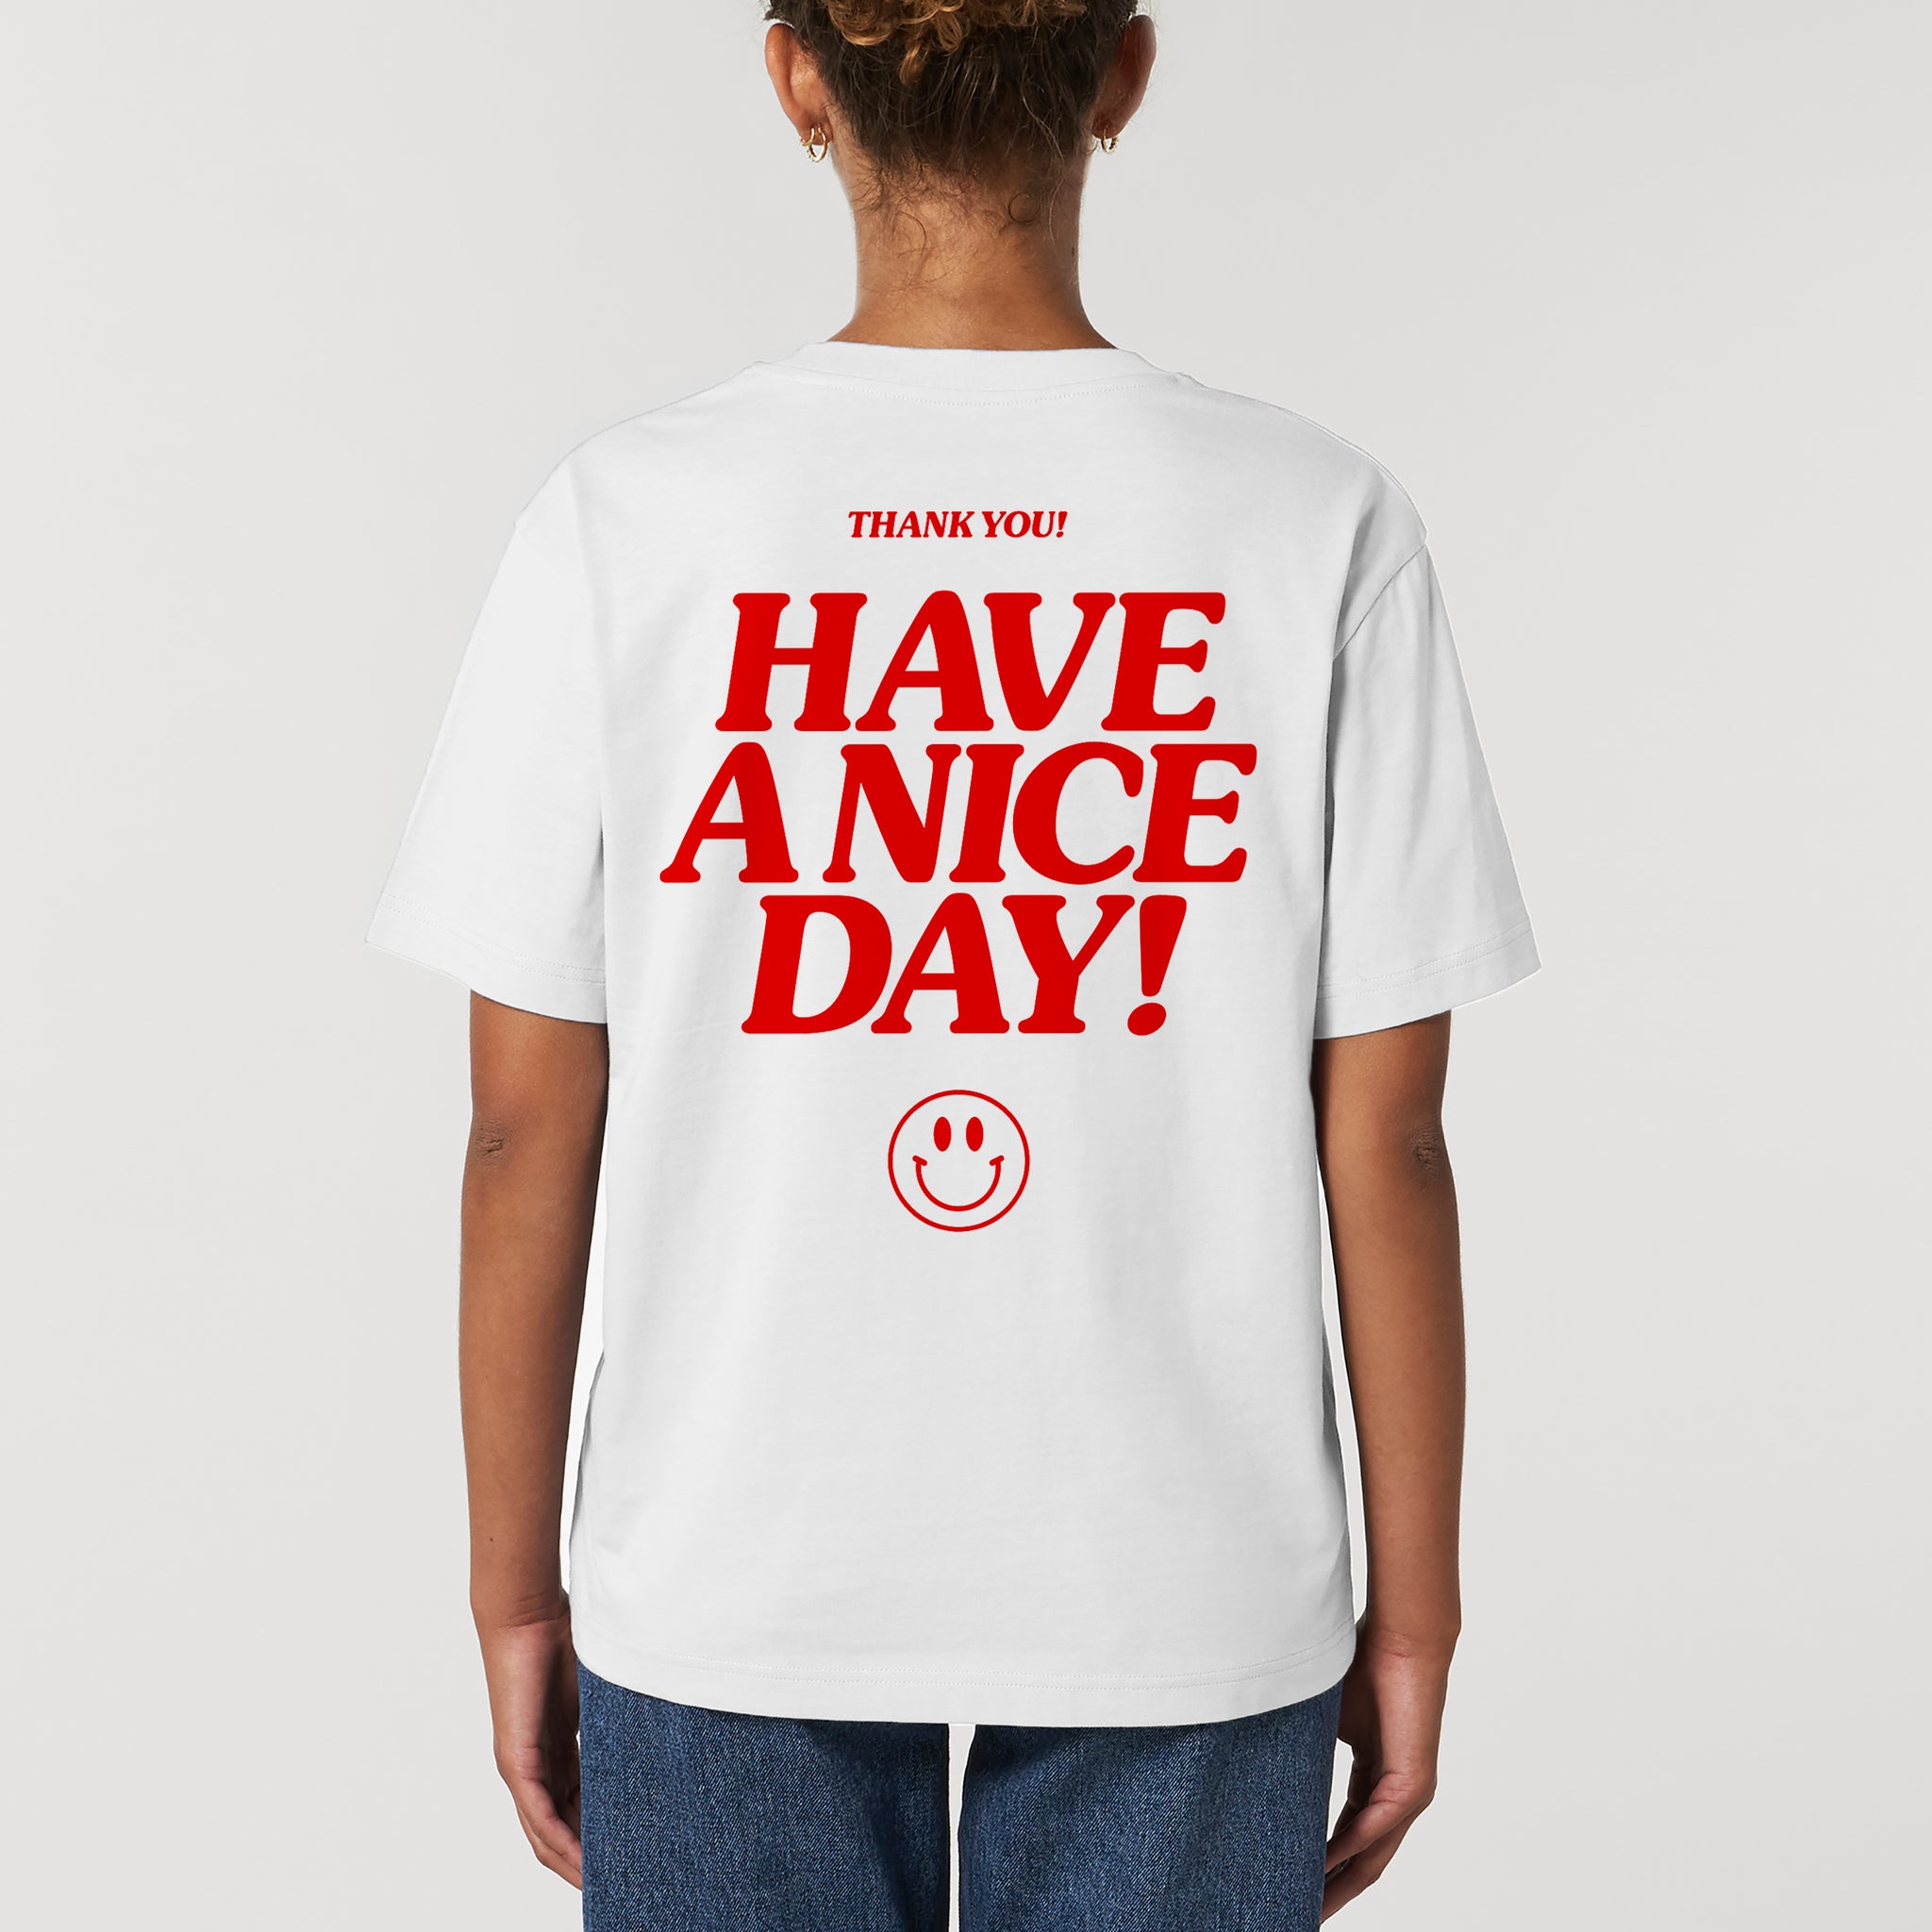 'Have A Nice Day' Short Sleeve Organic Cotton T-shirt